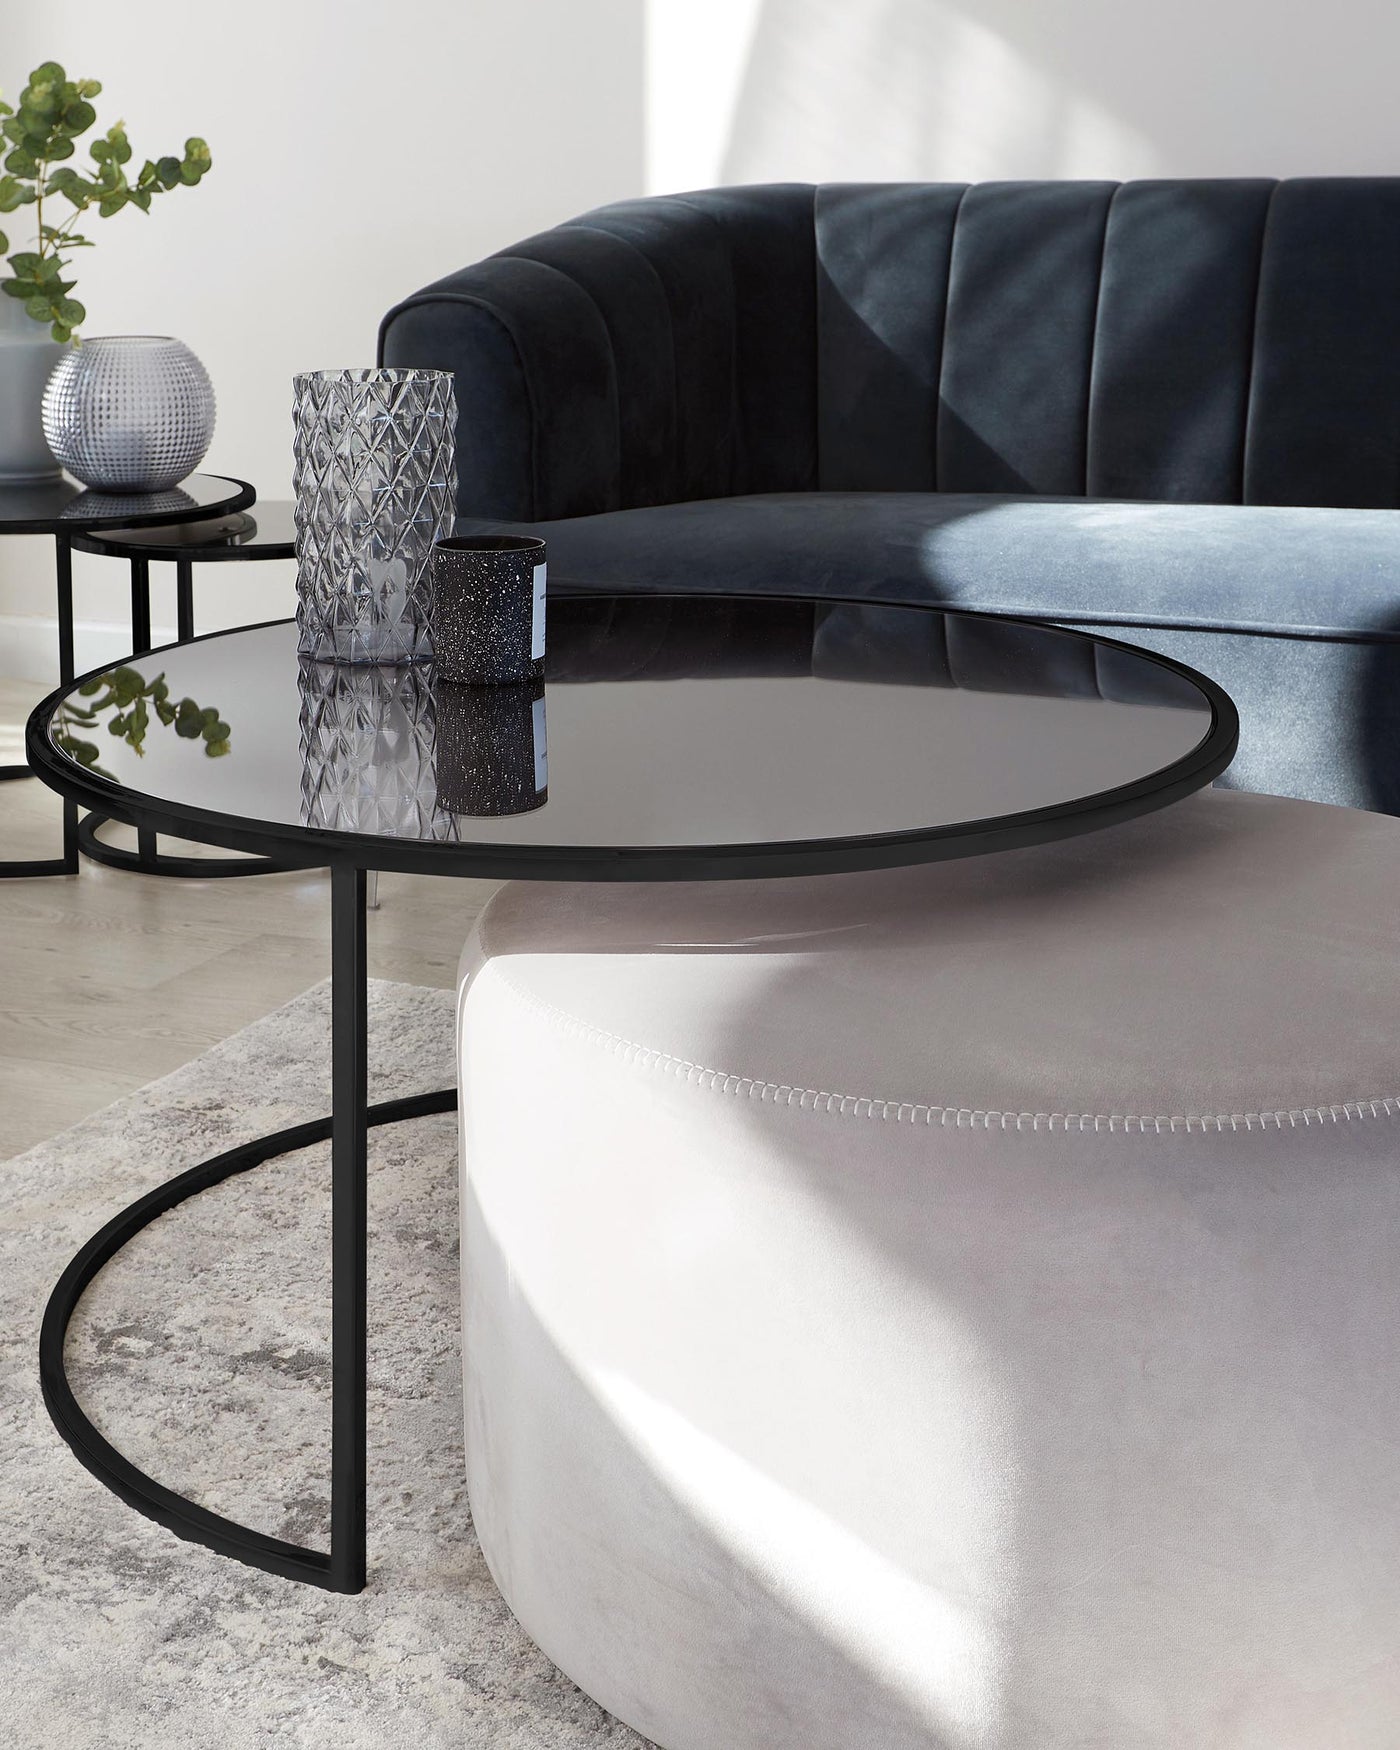 Elegant contemporary living room furniture featuring a sleek black velvet curved sofa, a round glass-top side table with a black metal frame, and a light beige upholstered round ottoman with detailed stitching.